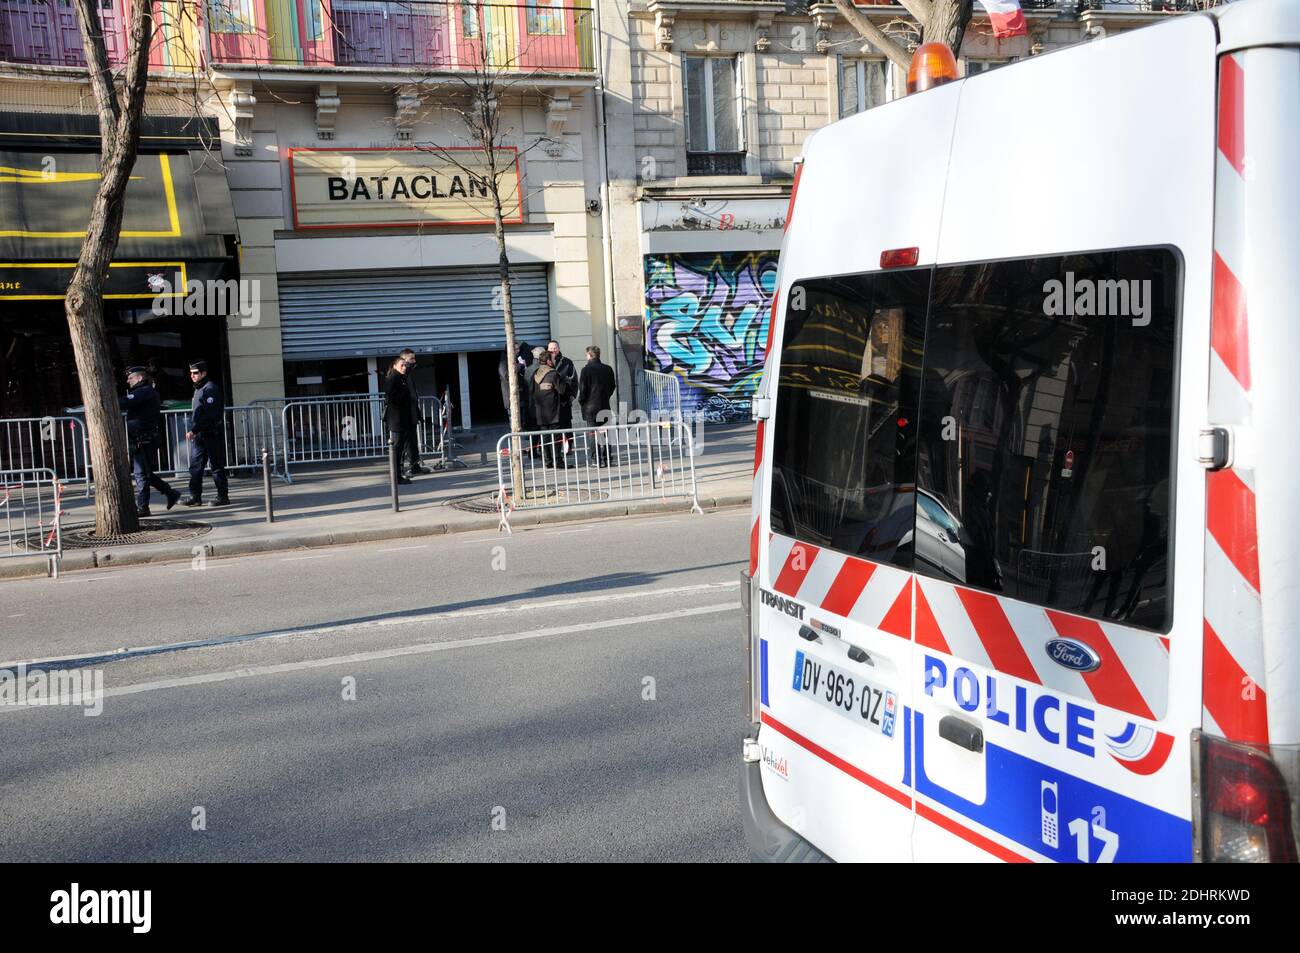 French parliamentary commission of enquiry into possible security failings over two major terror attacks in Paris in 2015, going into the Bataclan concert hall (seen behind) in Paris, France on March 17, 2016. Members of committee investigating government measures to fight terrorism were visiting the Bataclan concert hall on March 17, four months after a coordinated series of gun and bomb attacks at several sites in Paris on November 13, including the Bataclan concert hall, left 130 dead. Photo by Alain Apaydin/ABACAPRESS.COM Stock Photo